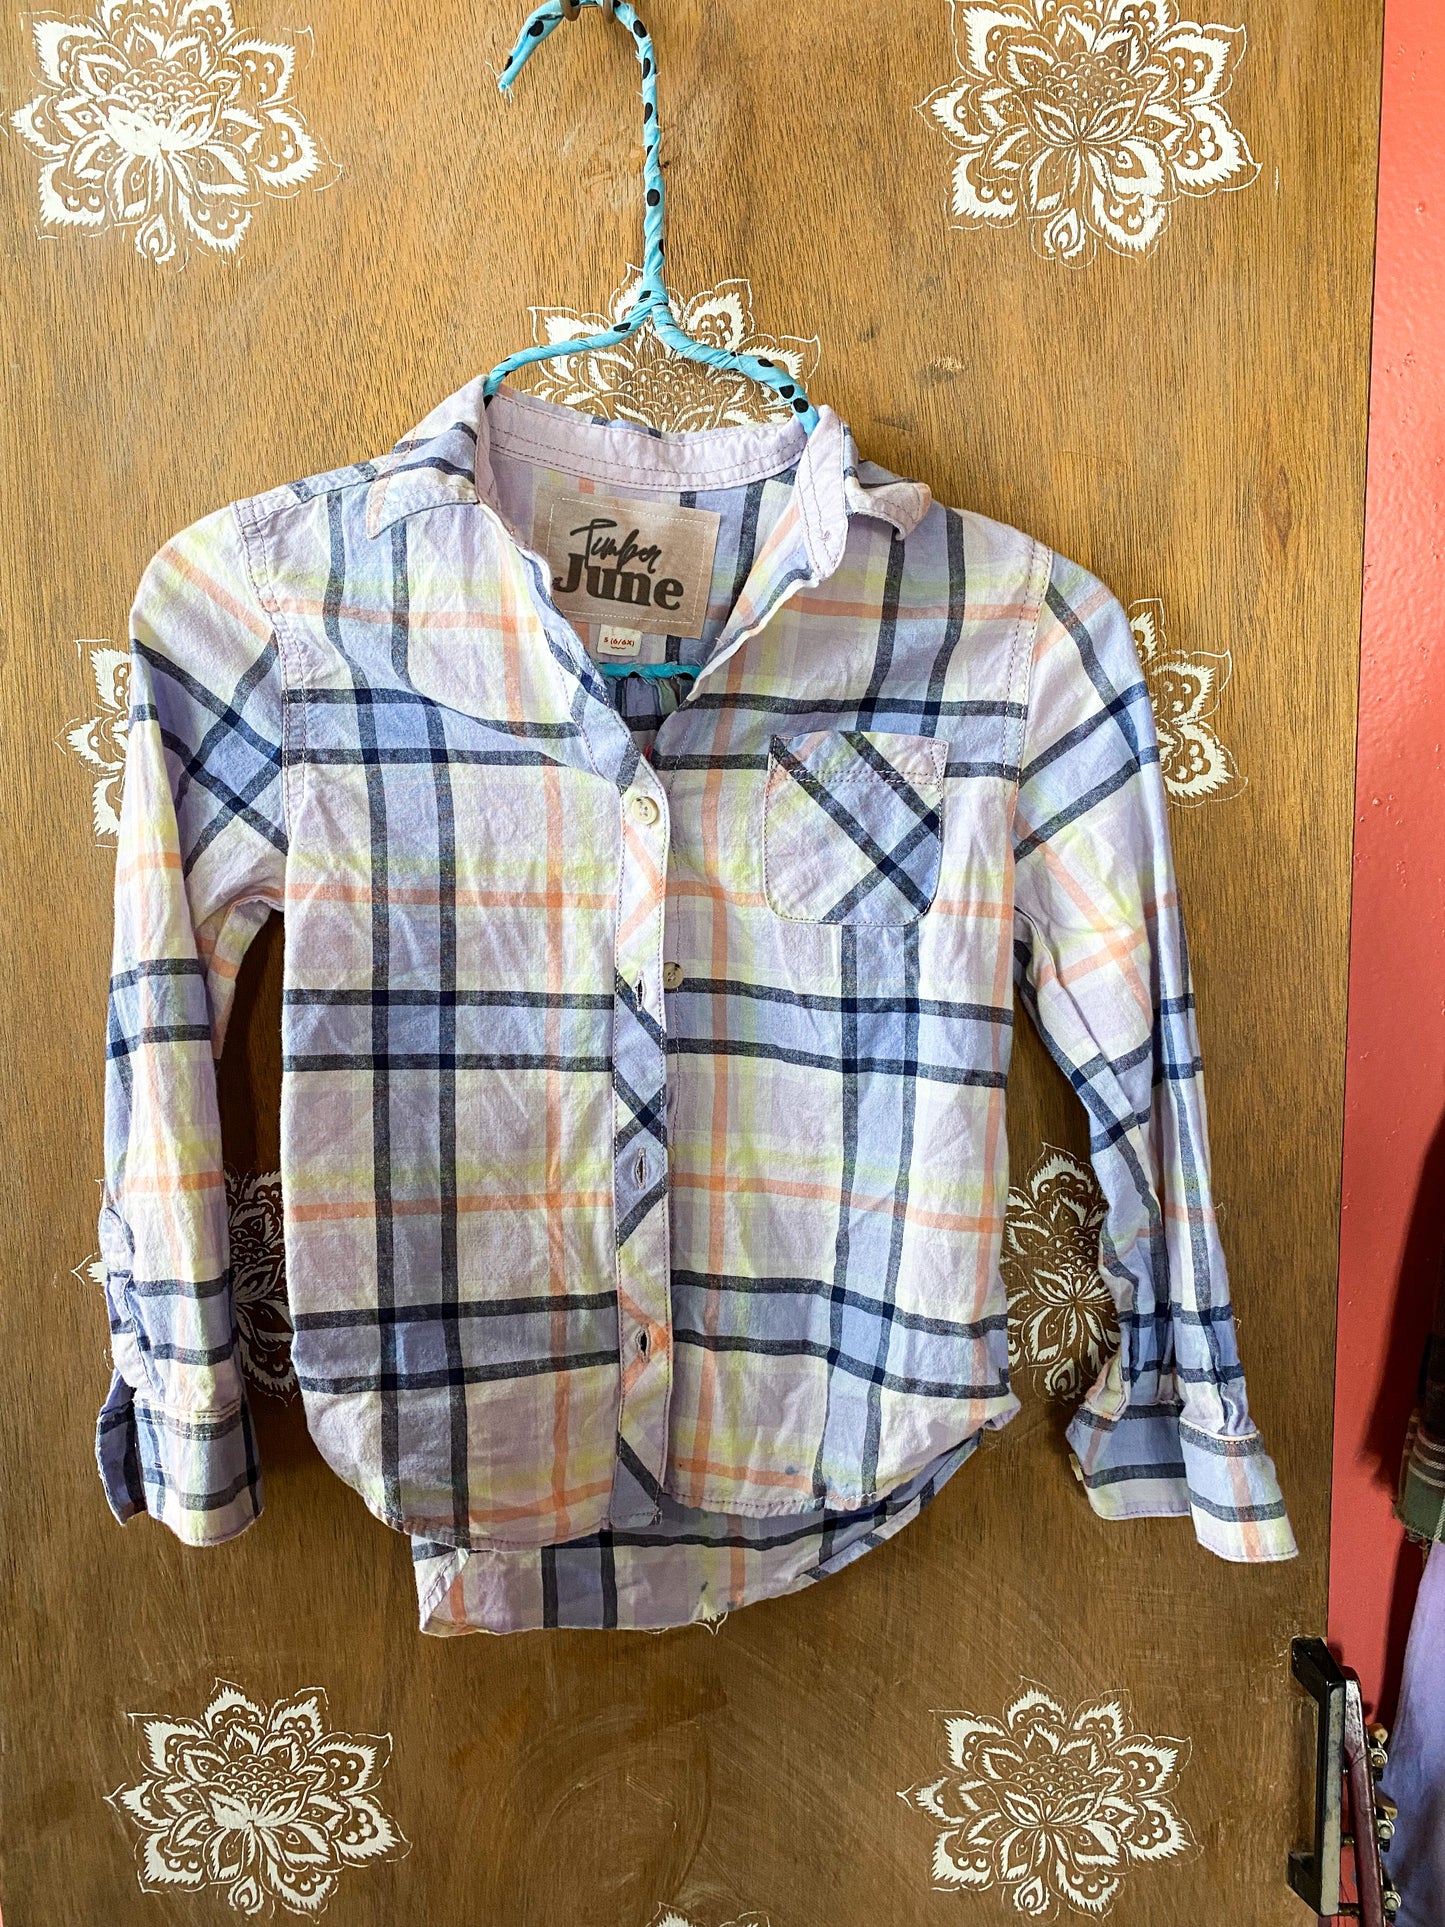 Concert purple tee kids upcycled plaid flannel size 6/6x